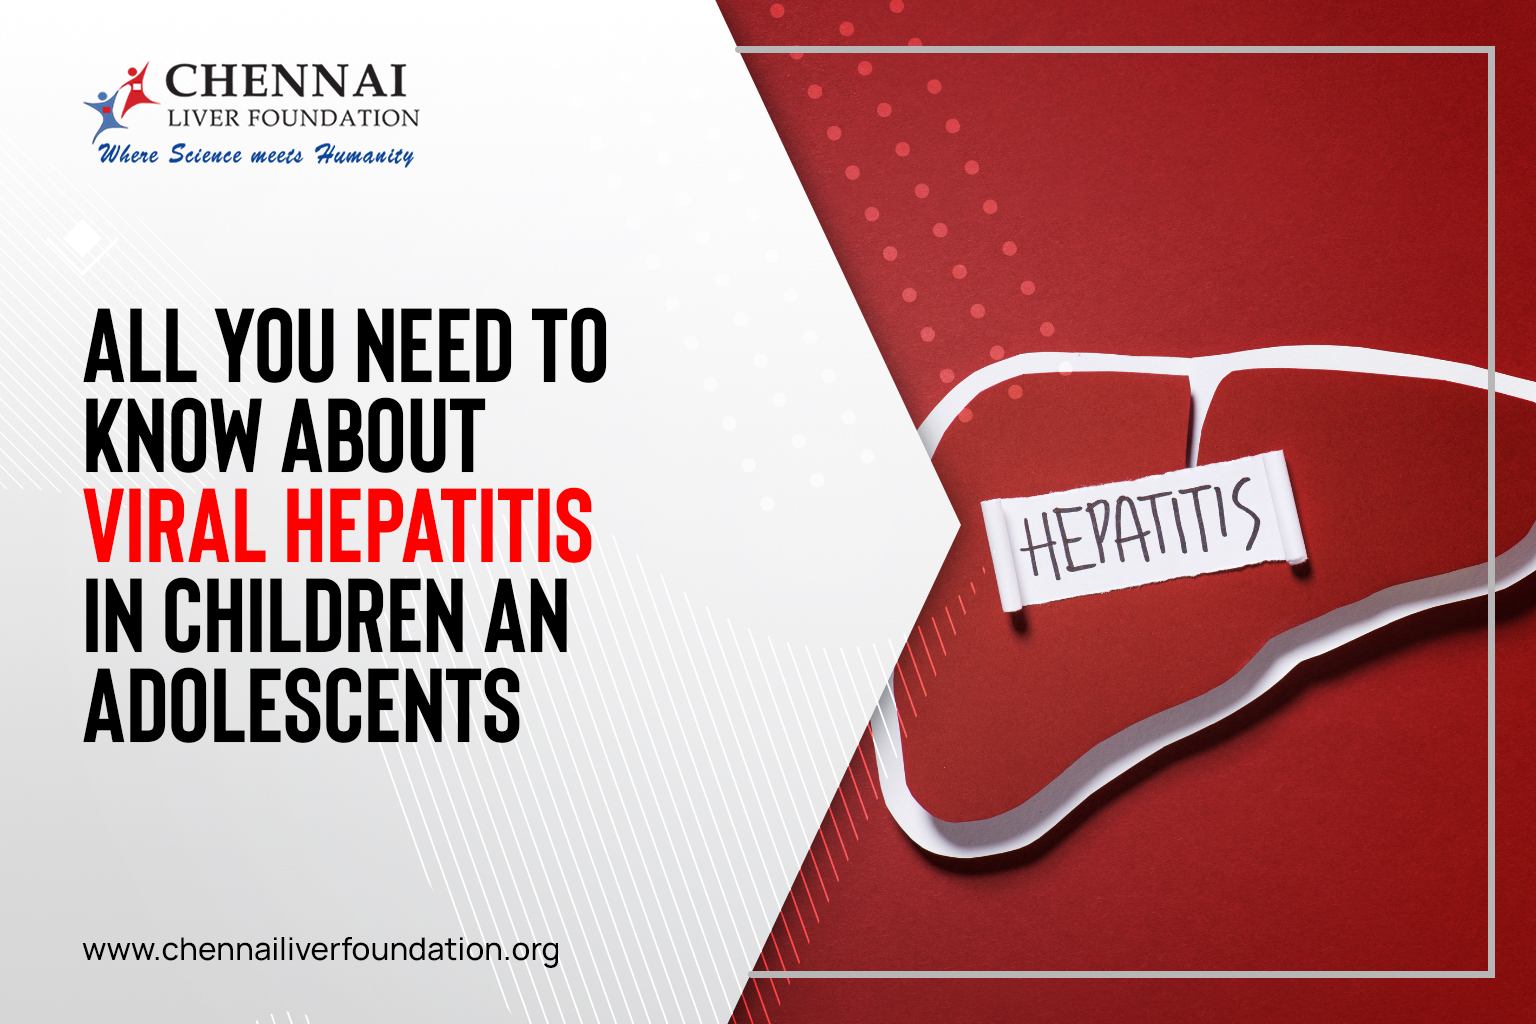 All You Need To Know About Viral Hepatitis In Children And Adolescents